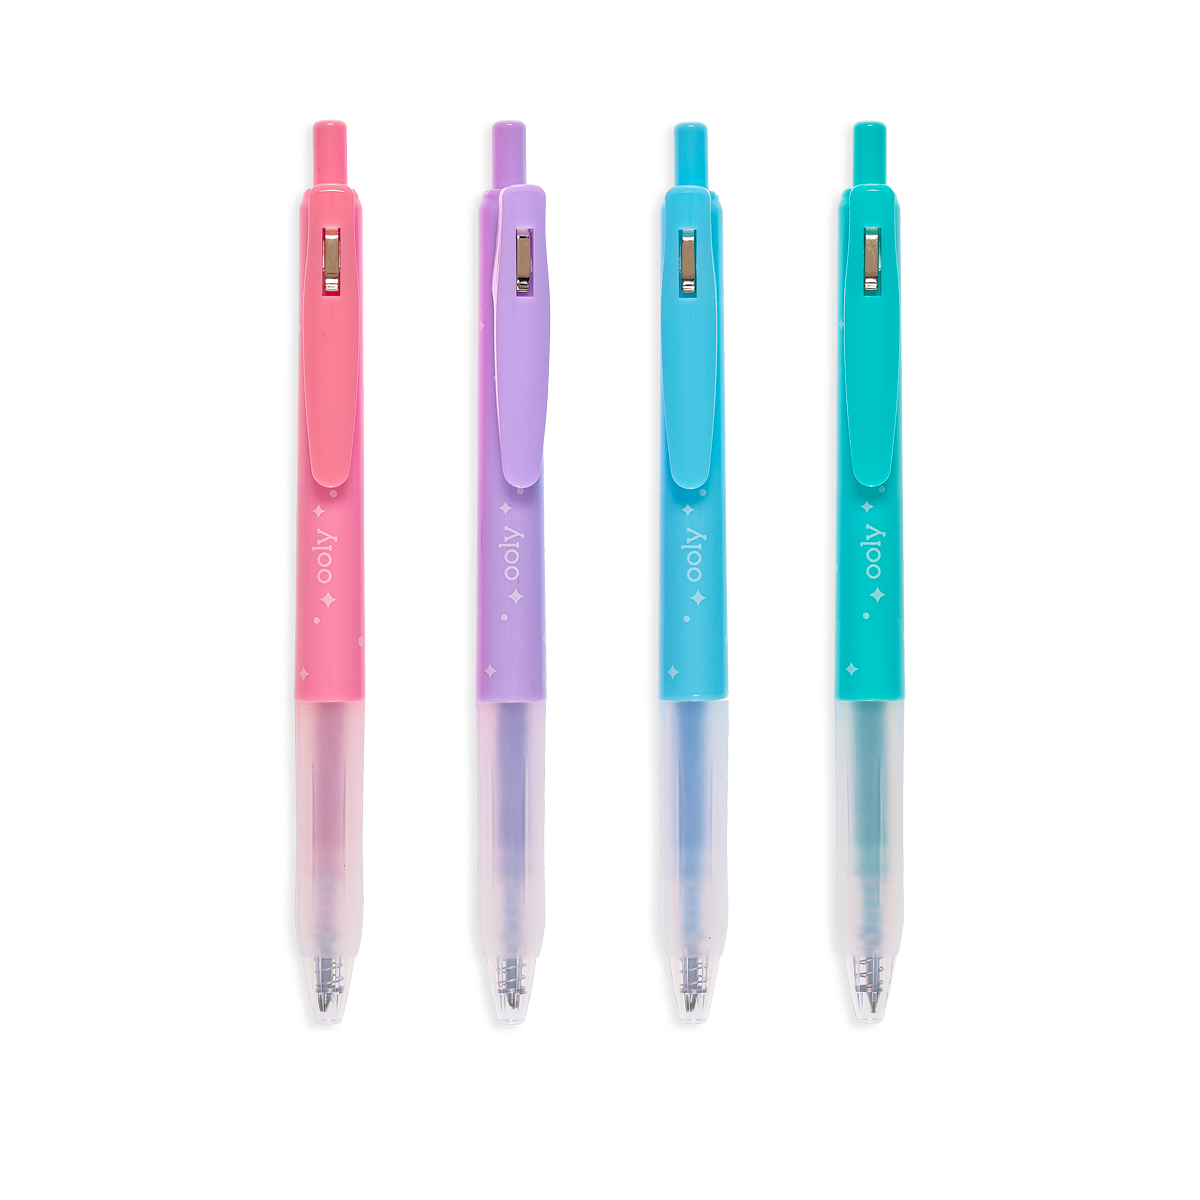 OOLY Oh My Glitter! Retractable Gel Pens set of 4 out of packaging